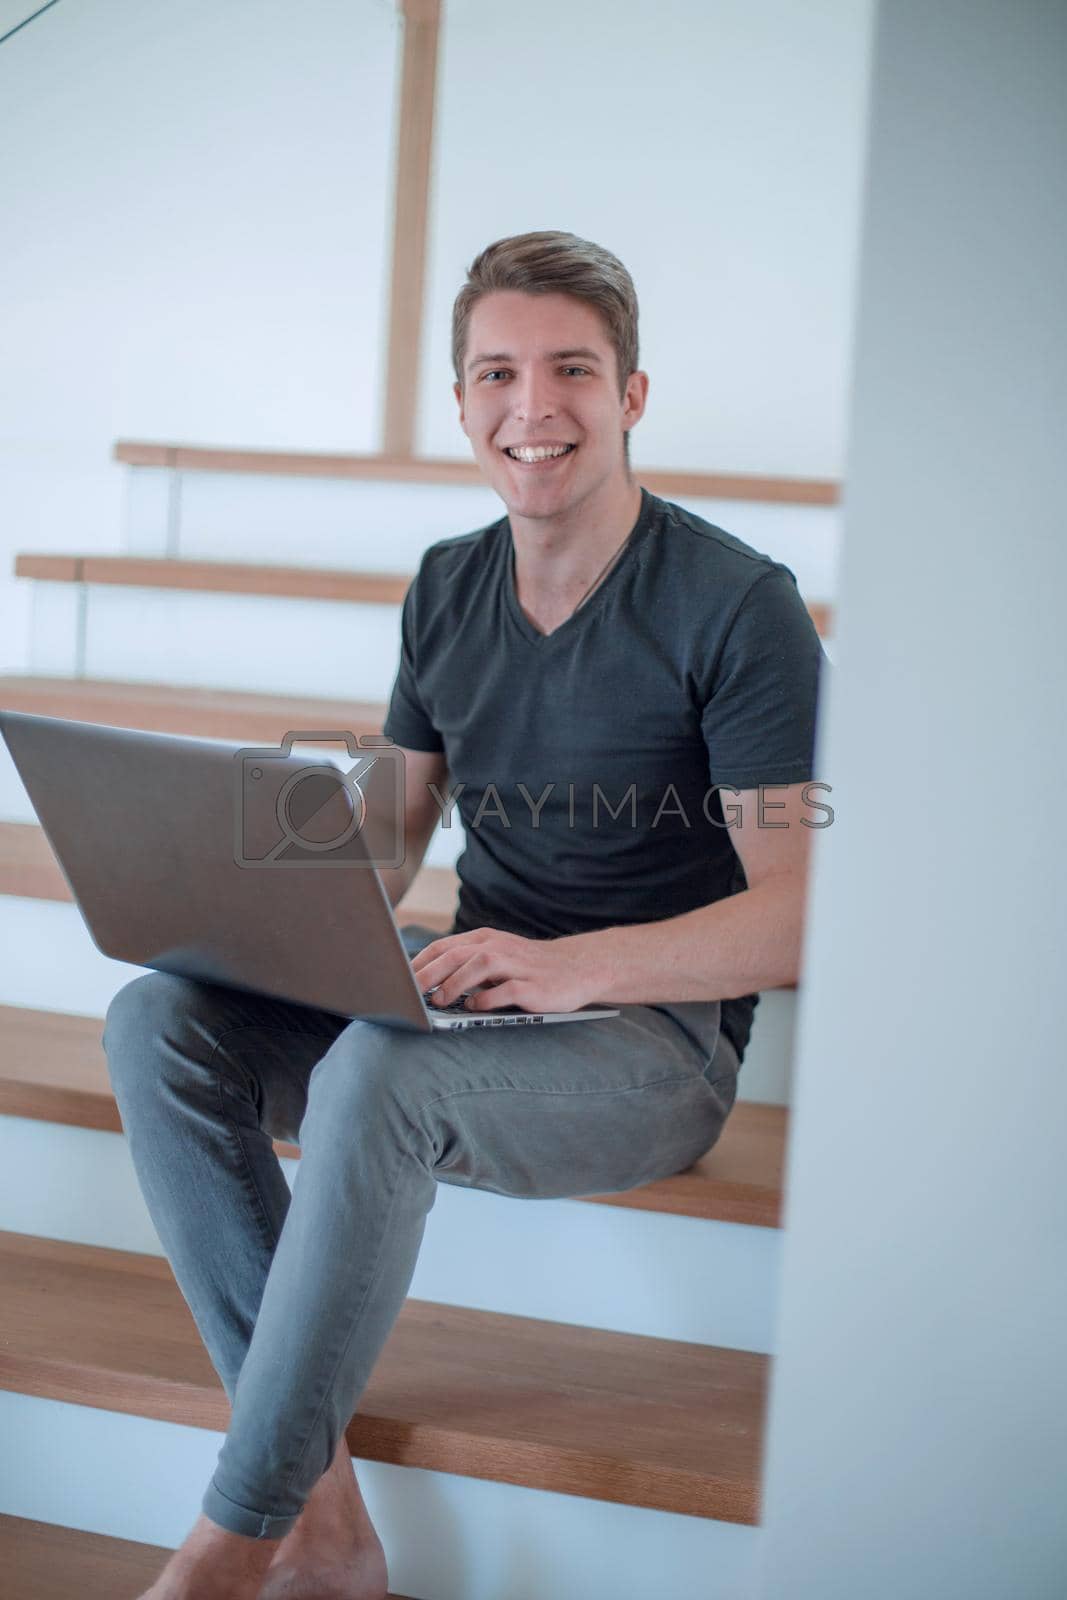 Royalty free image of cheerful young man talking by video link using laptop by asdf